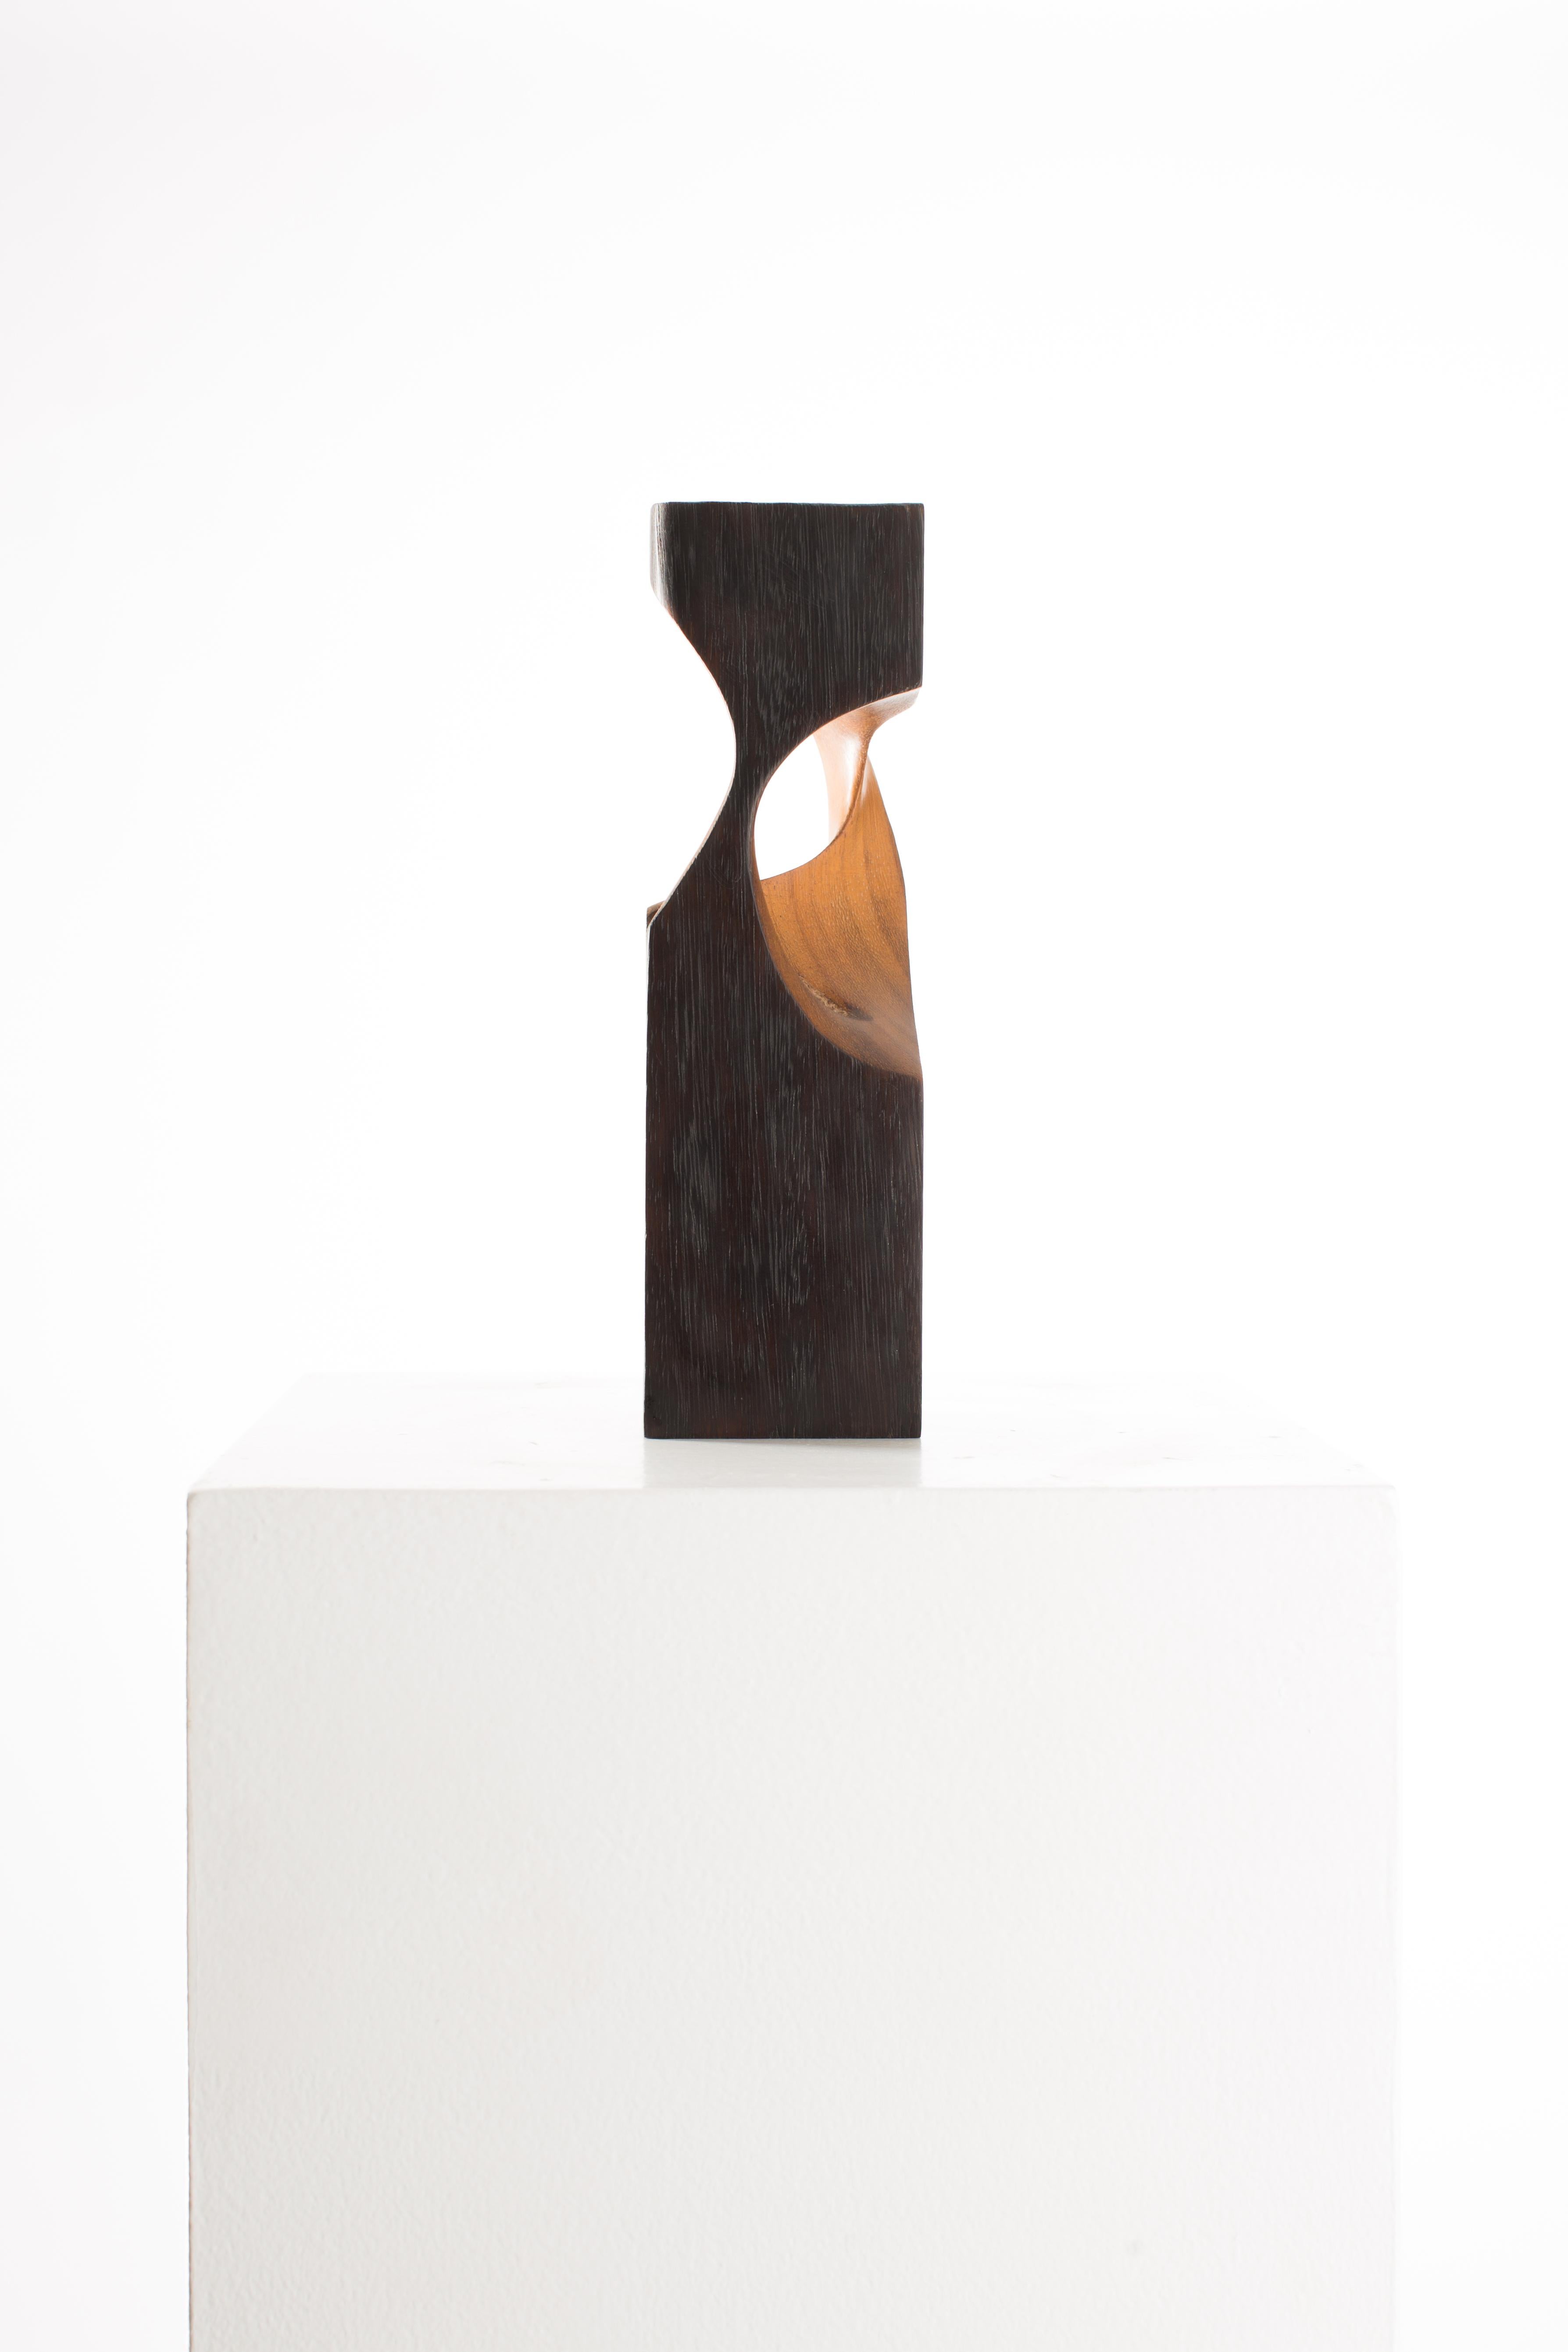 Black, Raw, Satin, Wood, Abstract, Contemporary, Modern, Sculpture For Sale 1